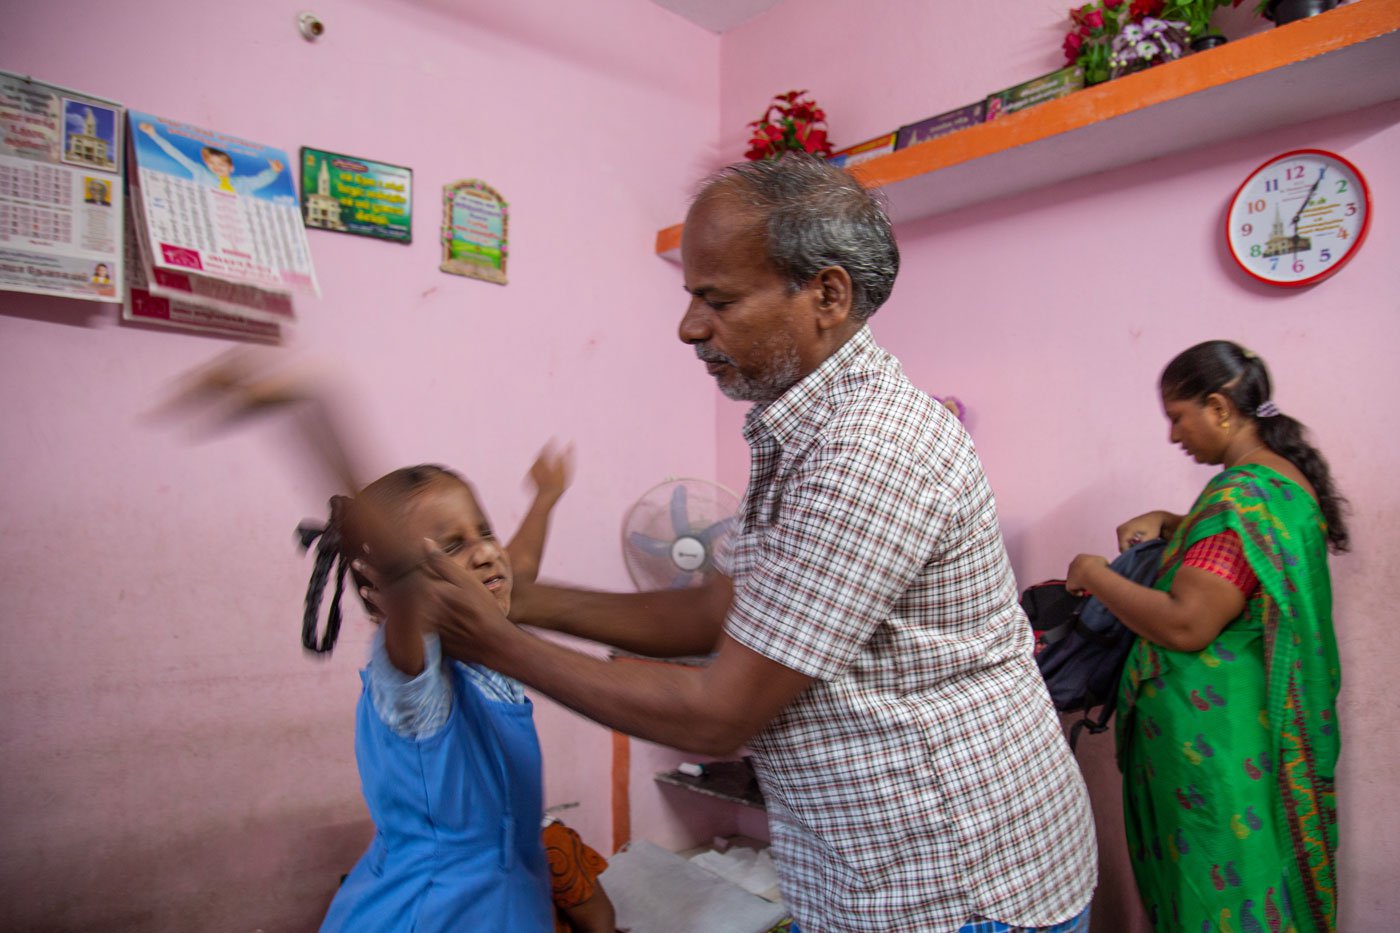 Balaraman is helping his granddaughter get ready for school. Saranya's parents are her only support system